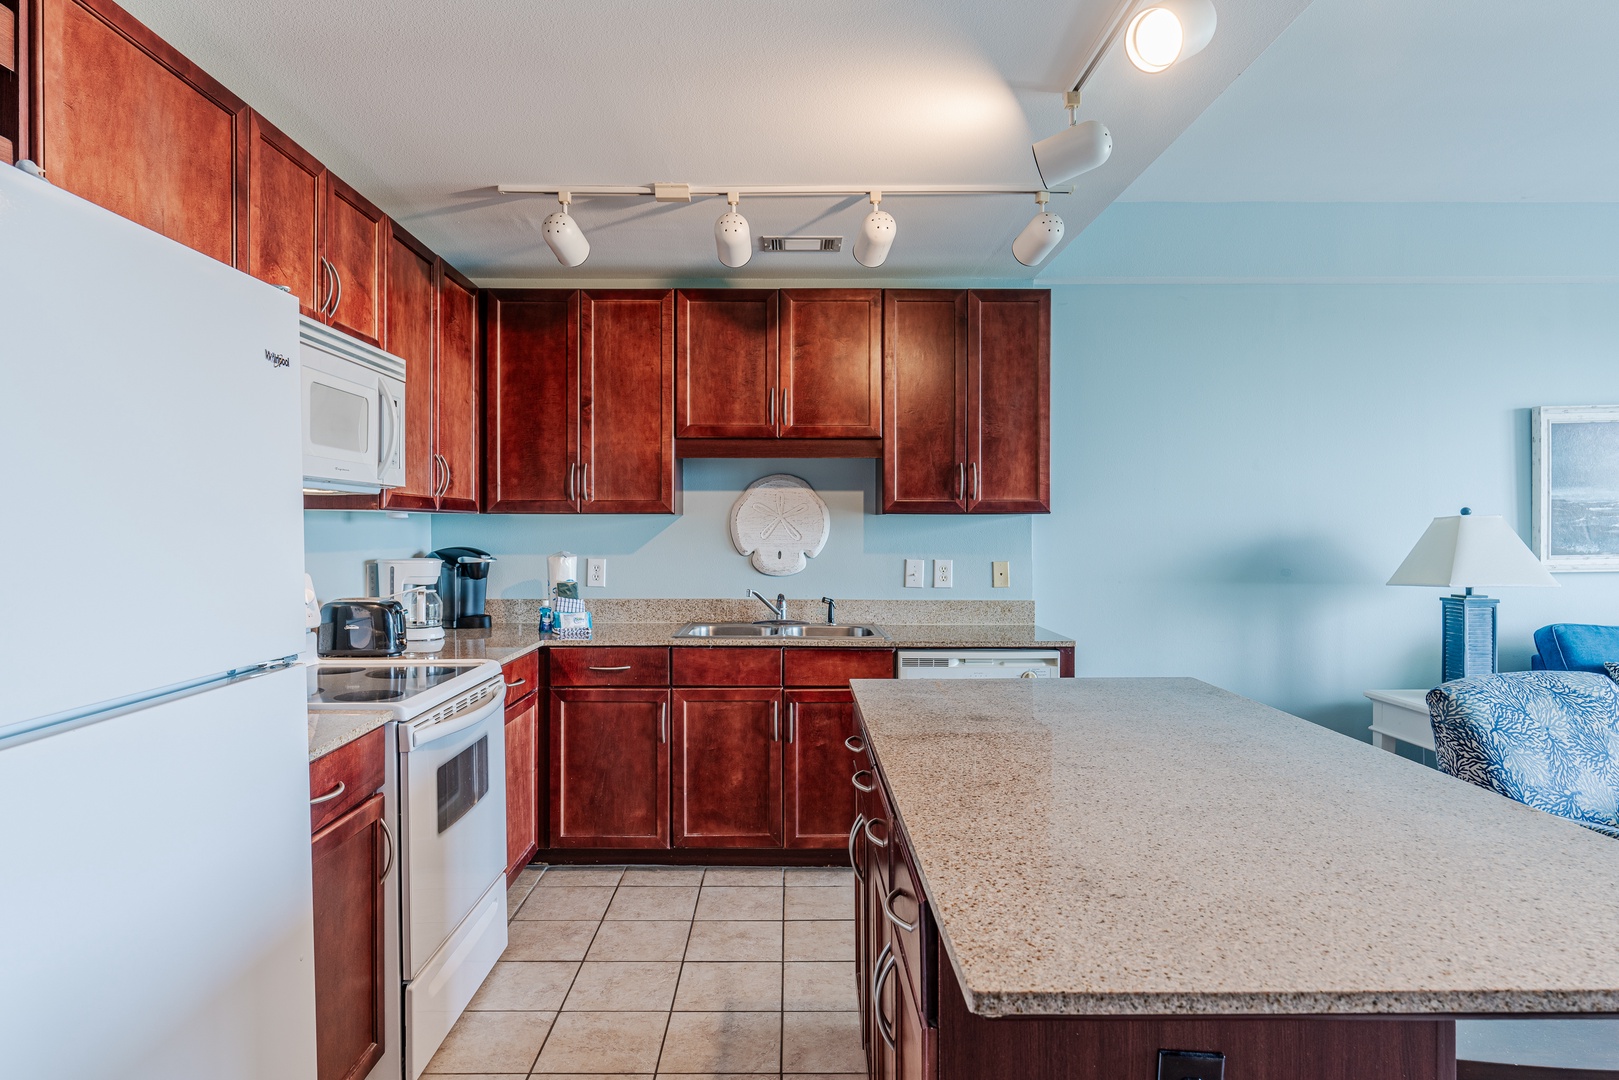 The spacious kitchen offers ample space & all the comforts of home